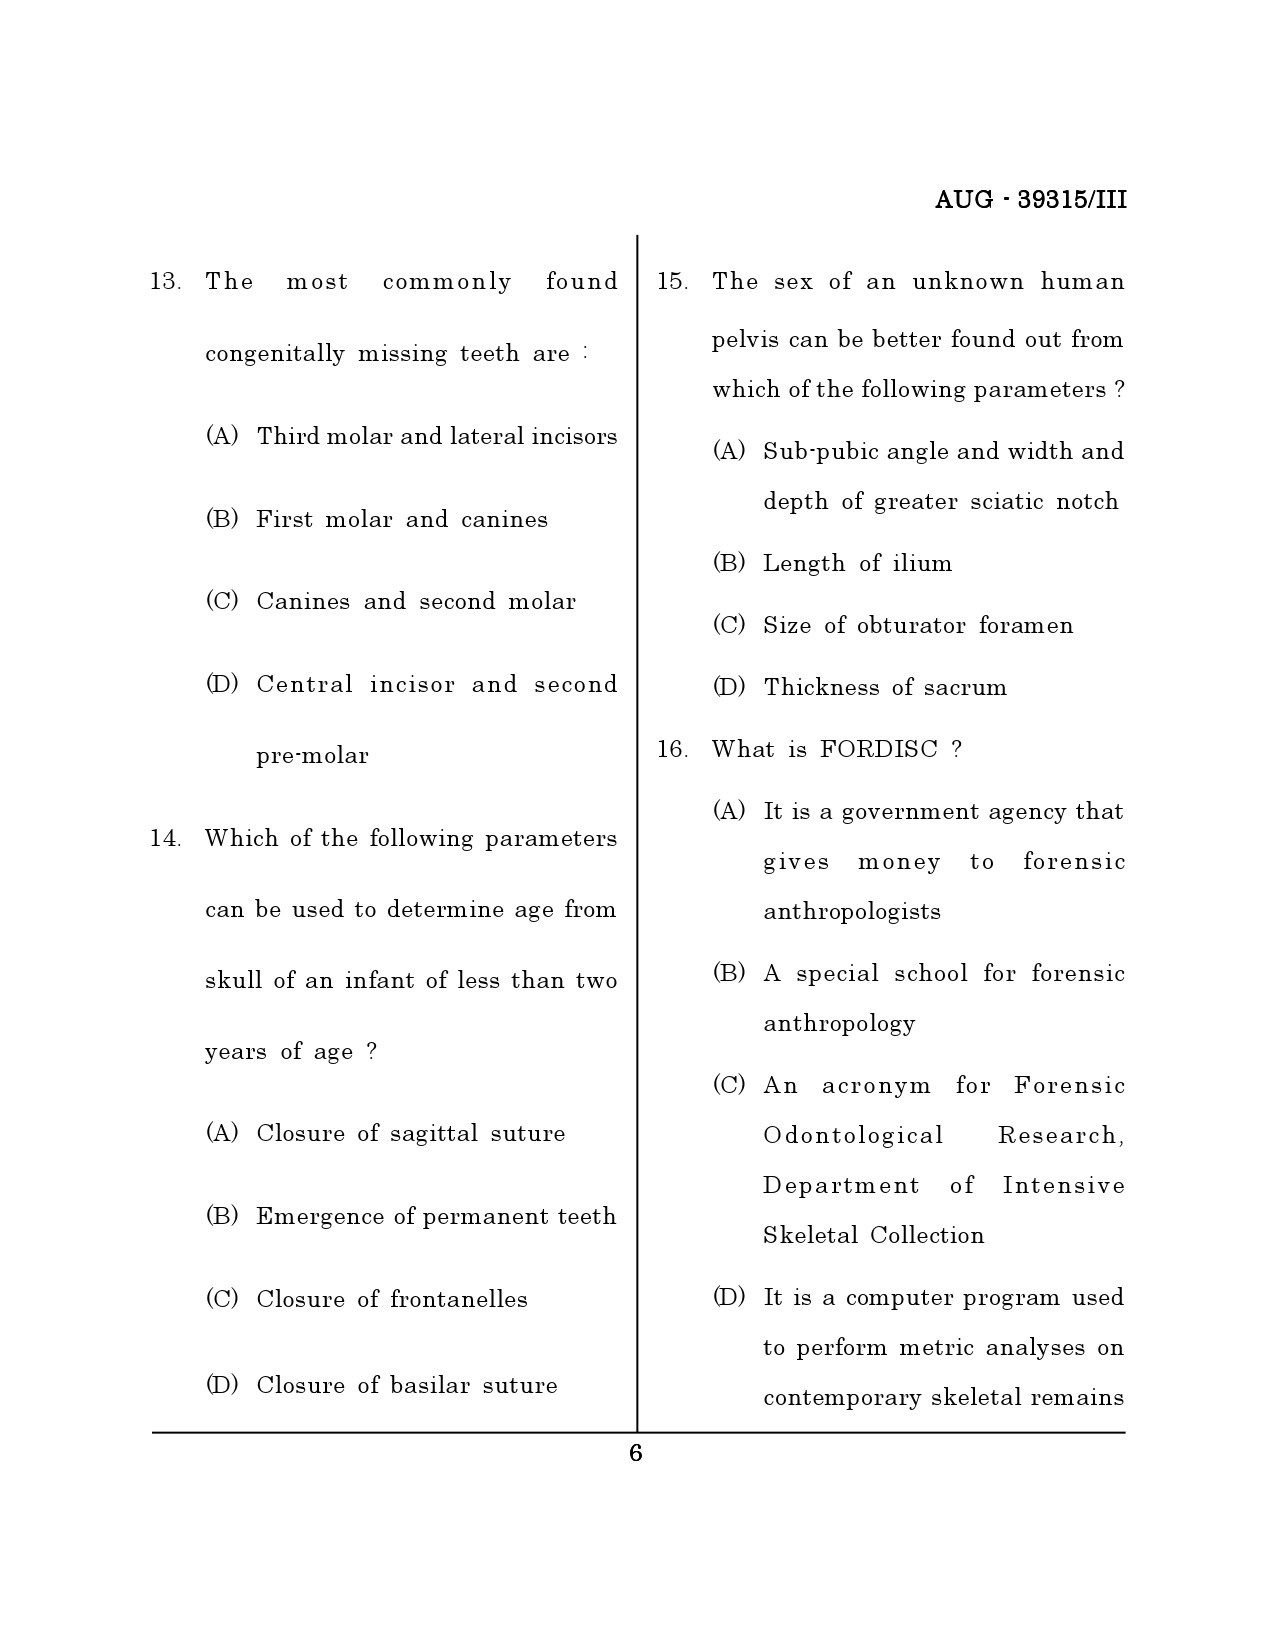 Maharashtra SET Forensic Science Question Paper III August 2015 5